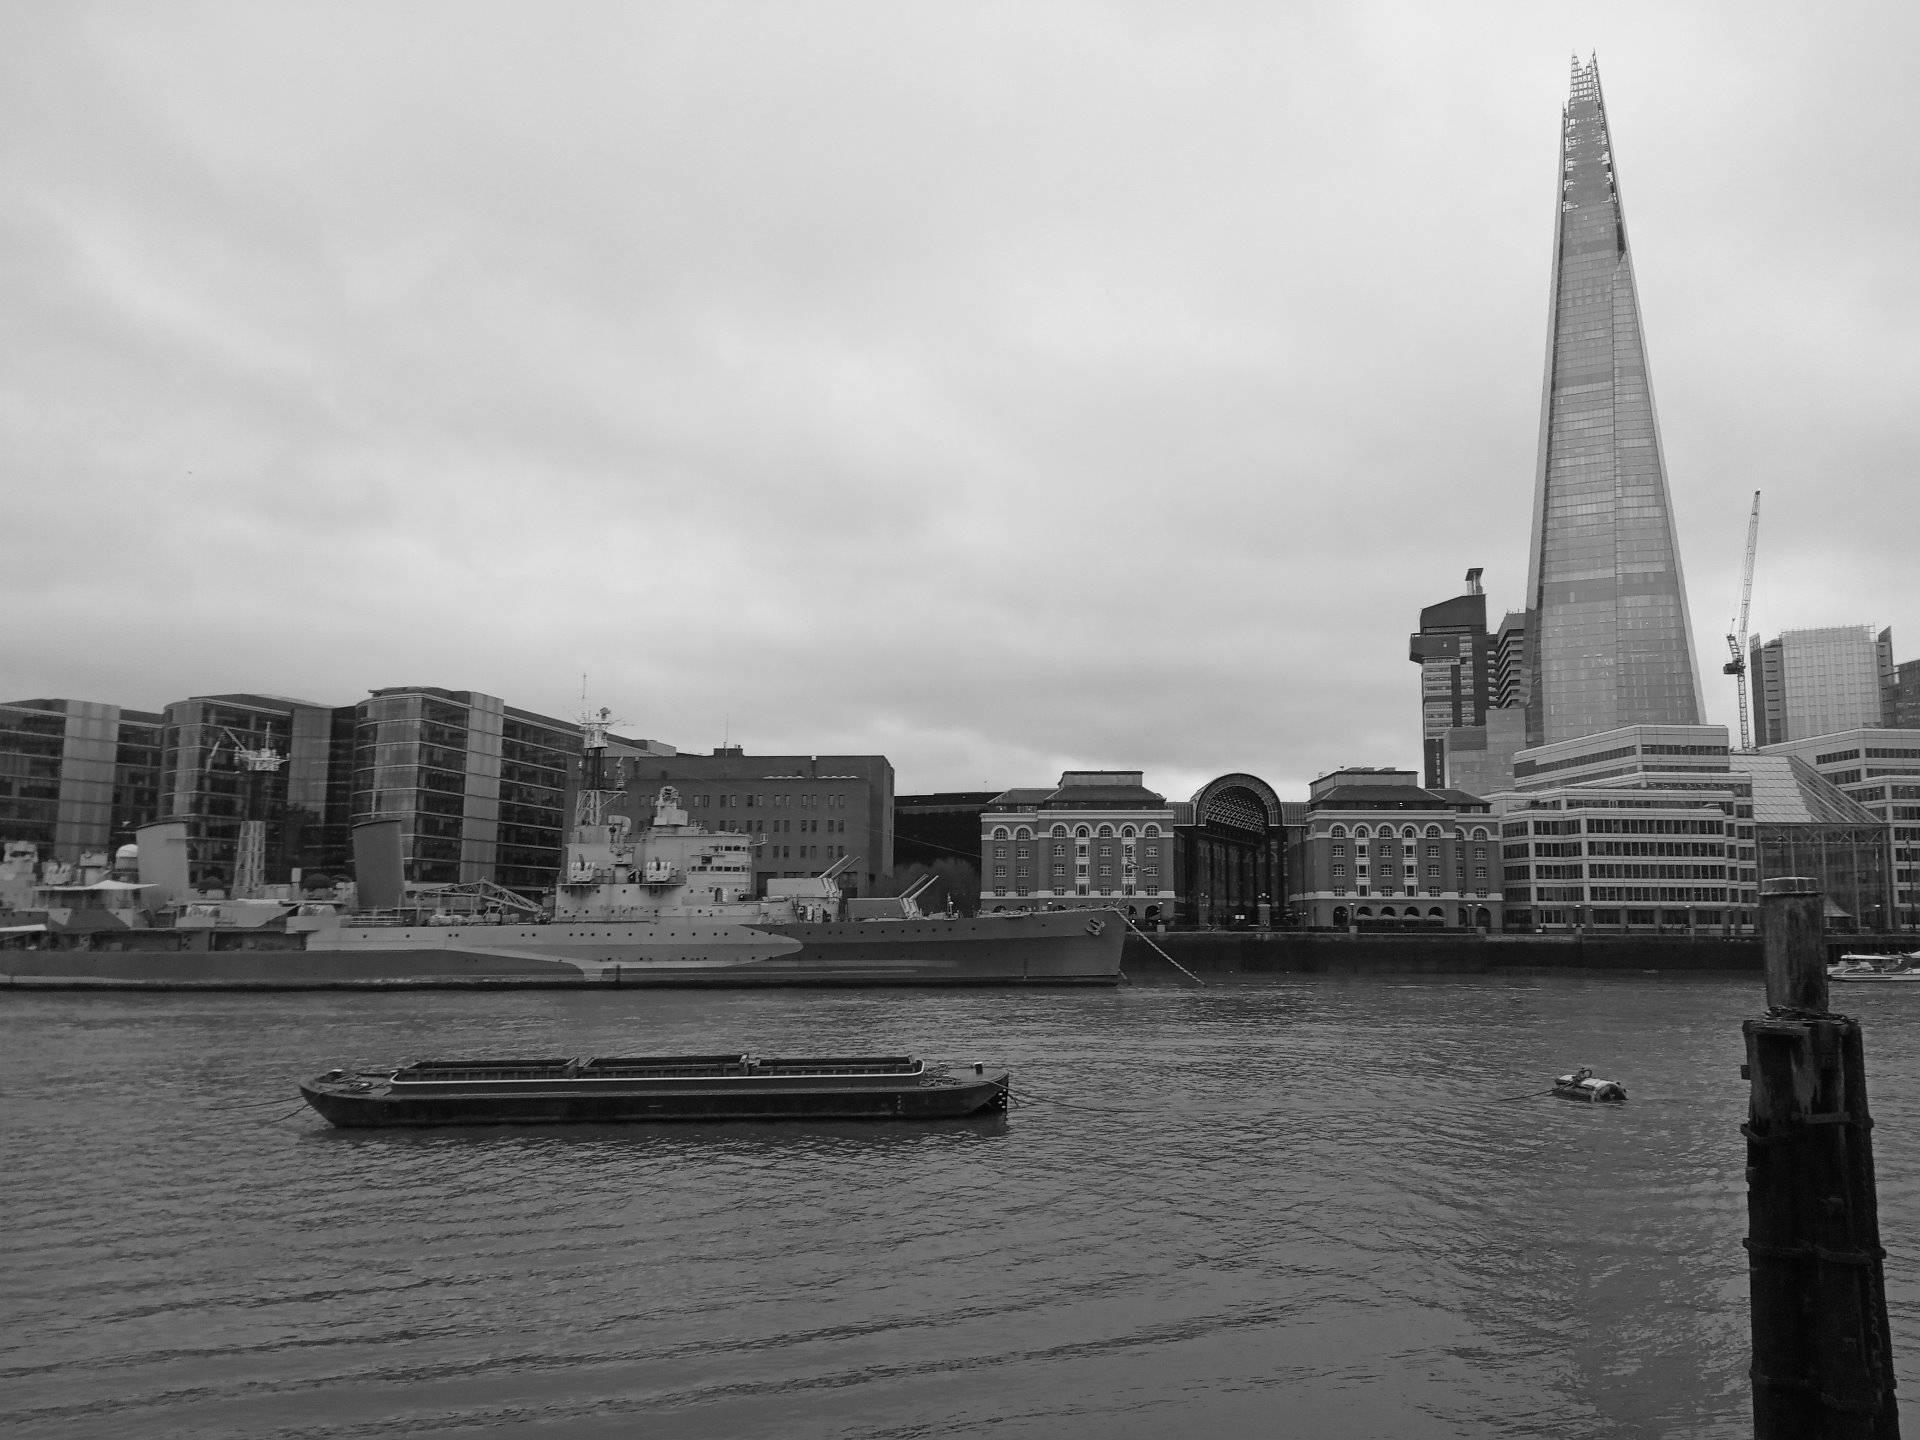 Joonto's Travels: London - Part II - Frozen and Melted